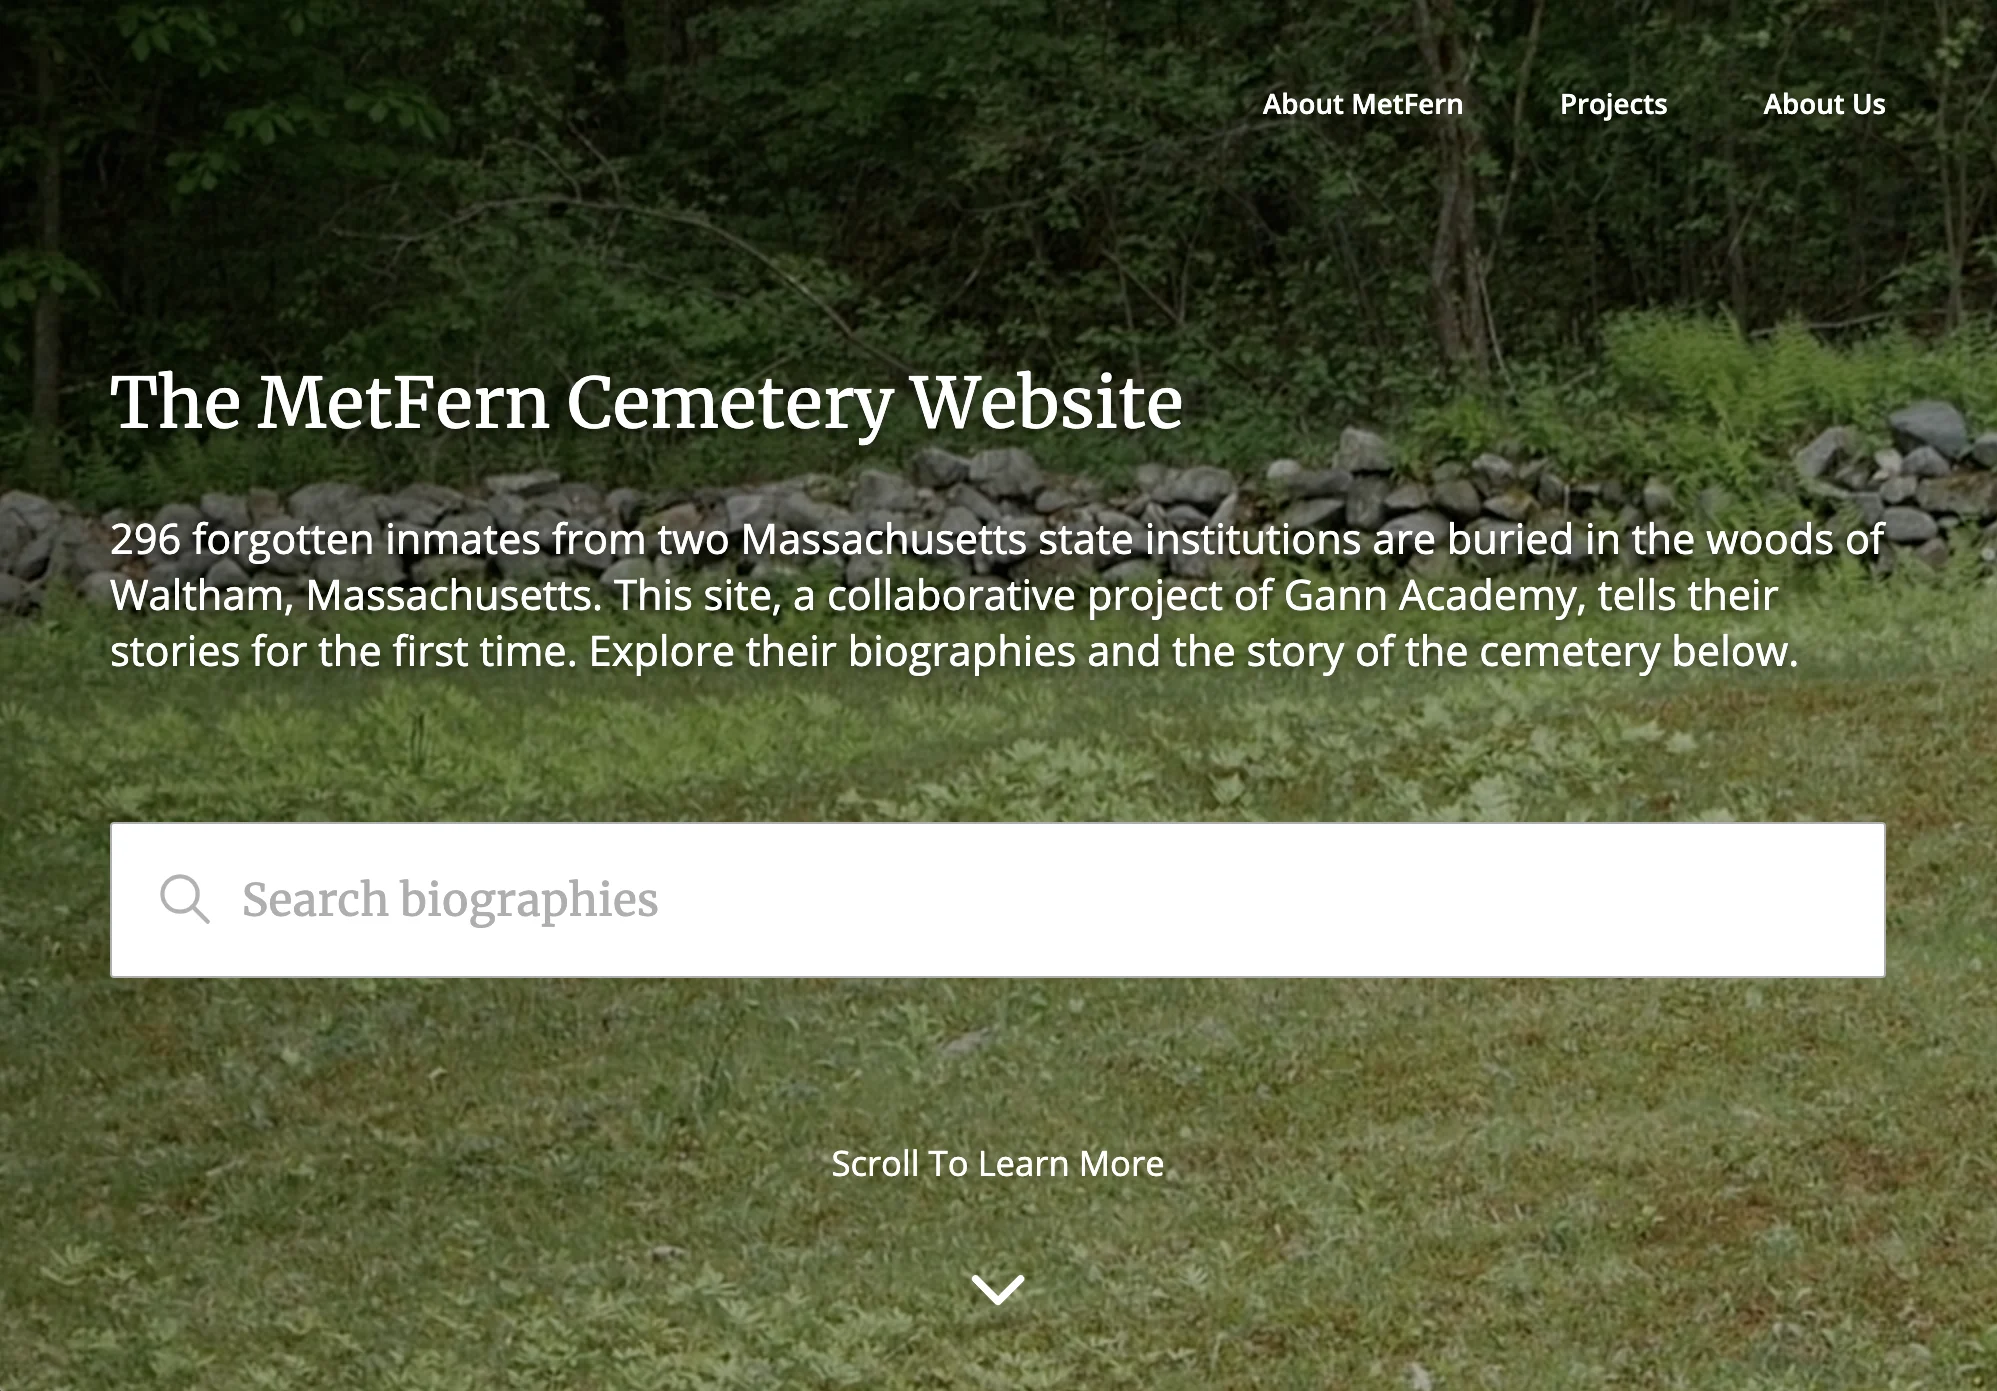 MetFern Cemetery Website Preview Cover Image